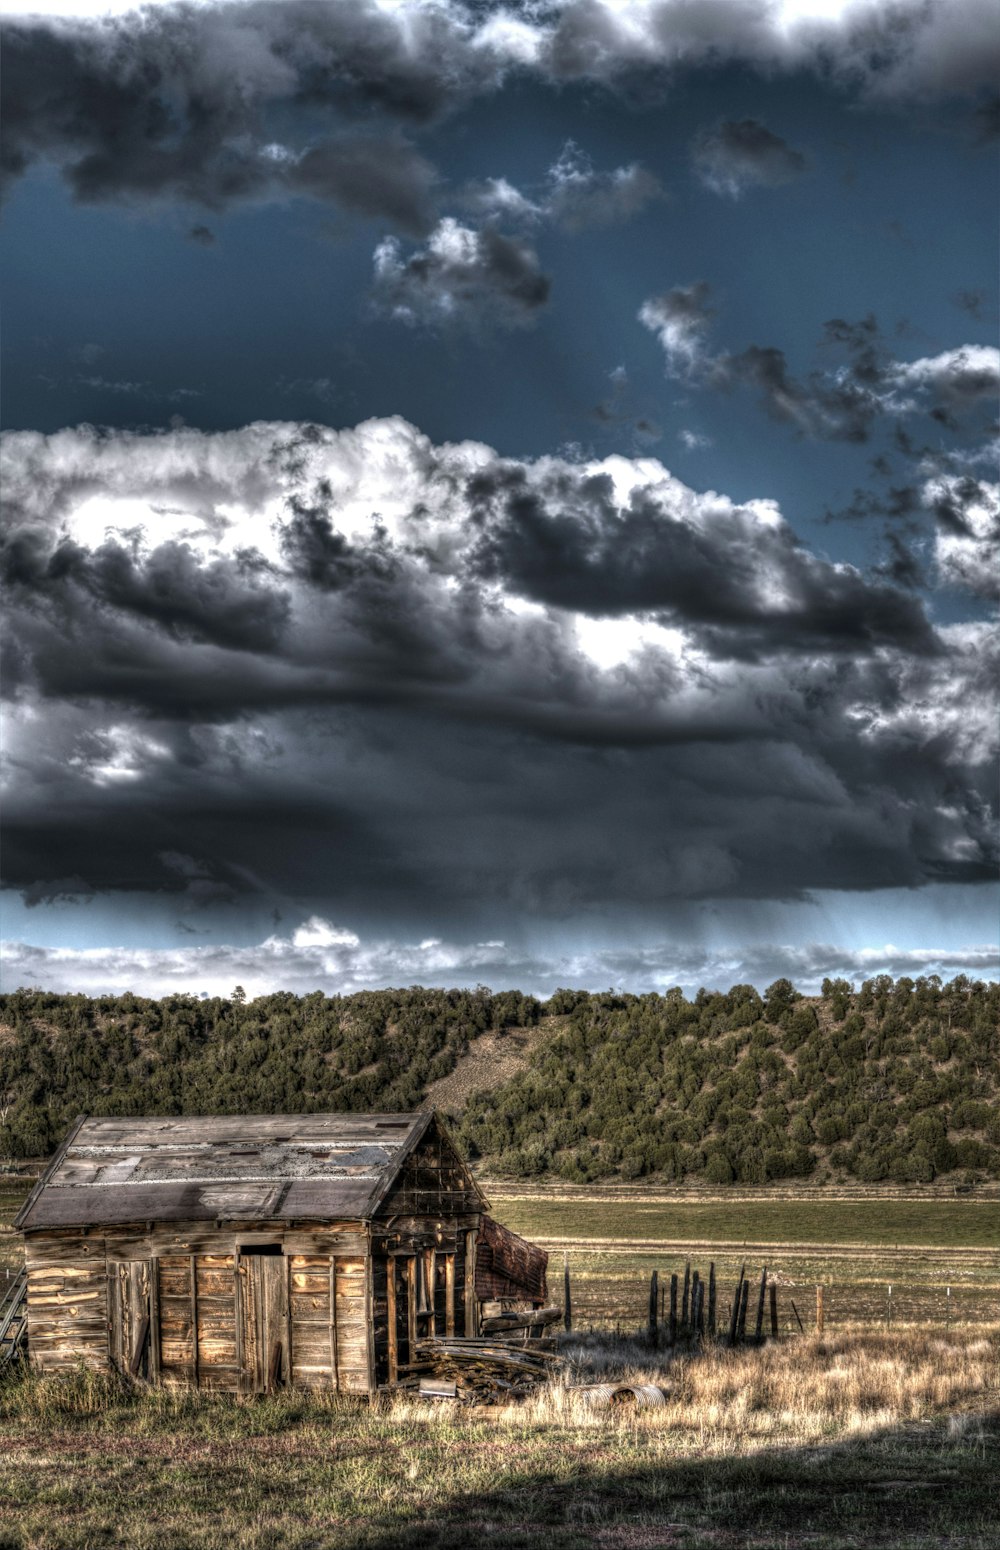 an old wooden building in a field under a cloudy sky